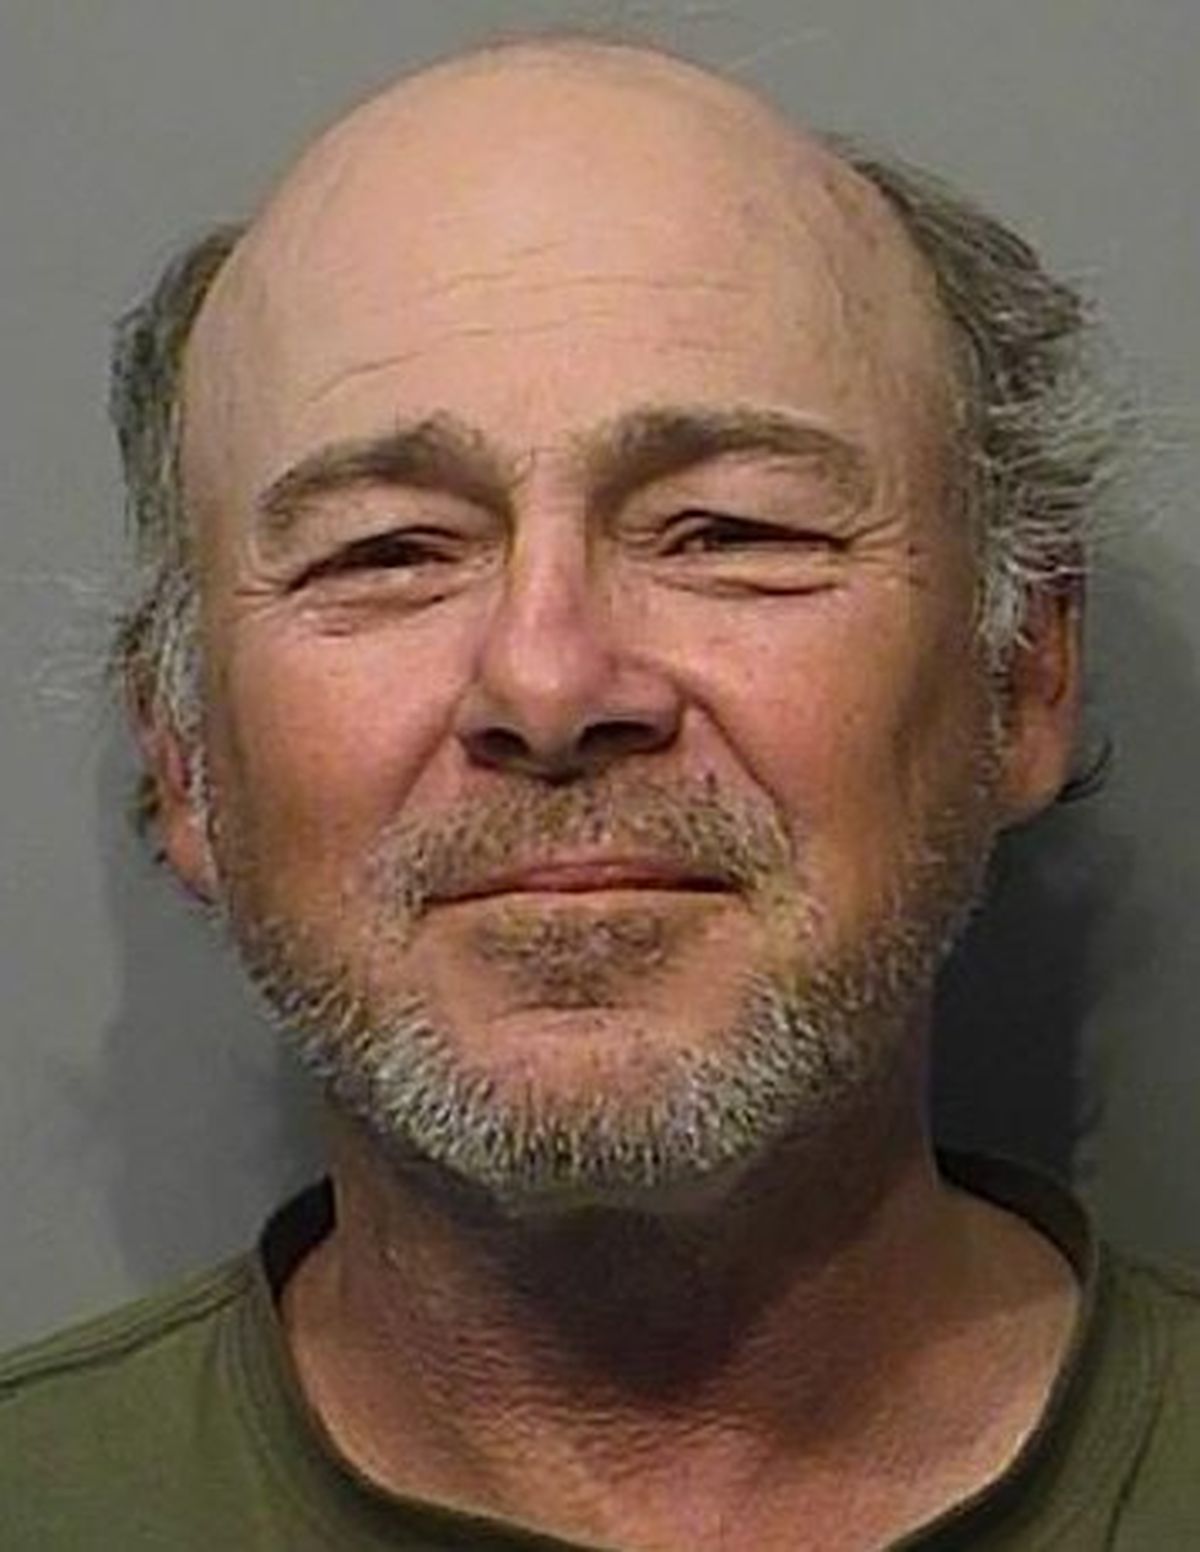 James H. Kountz is a transient suspected of stabbing another man in Coeur d